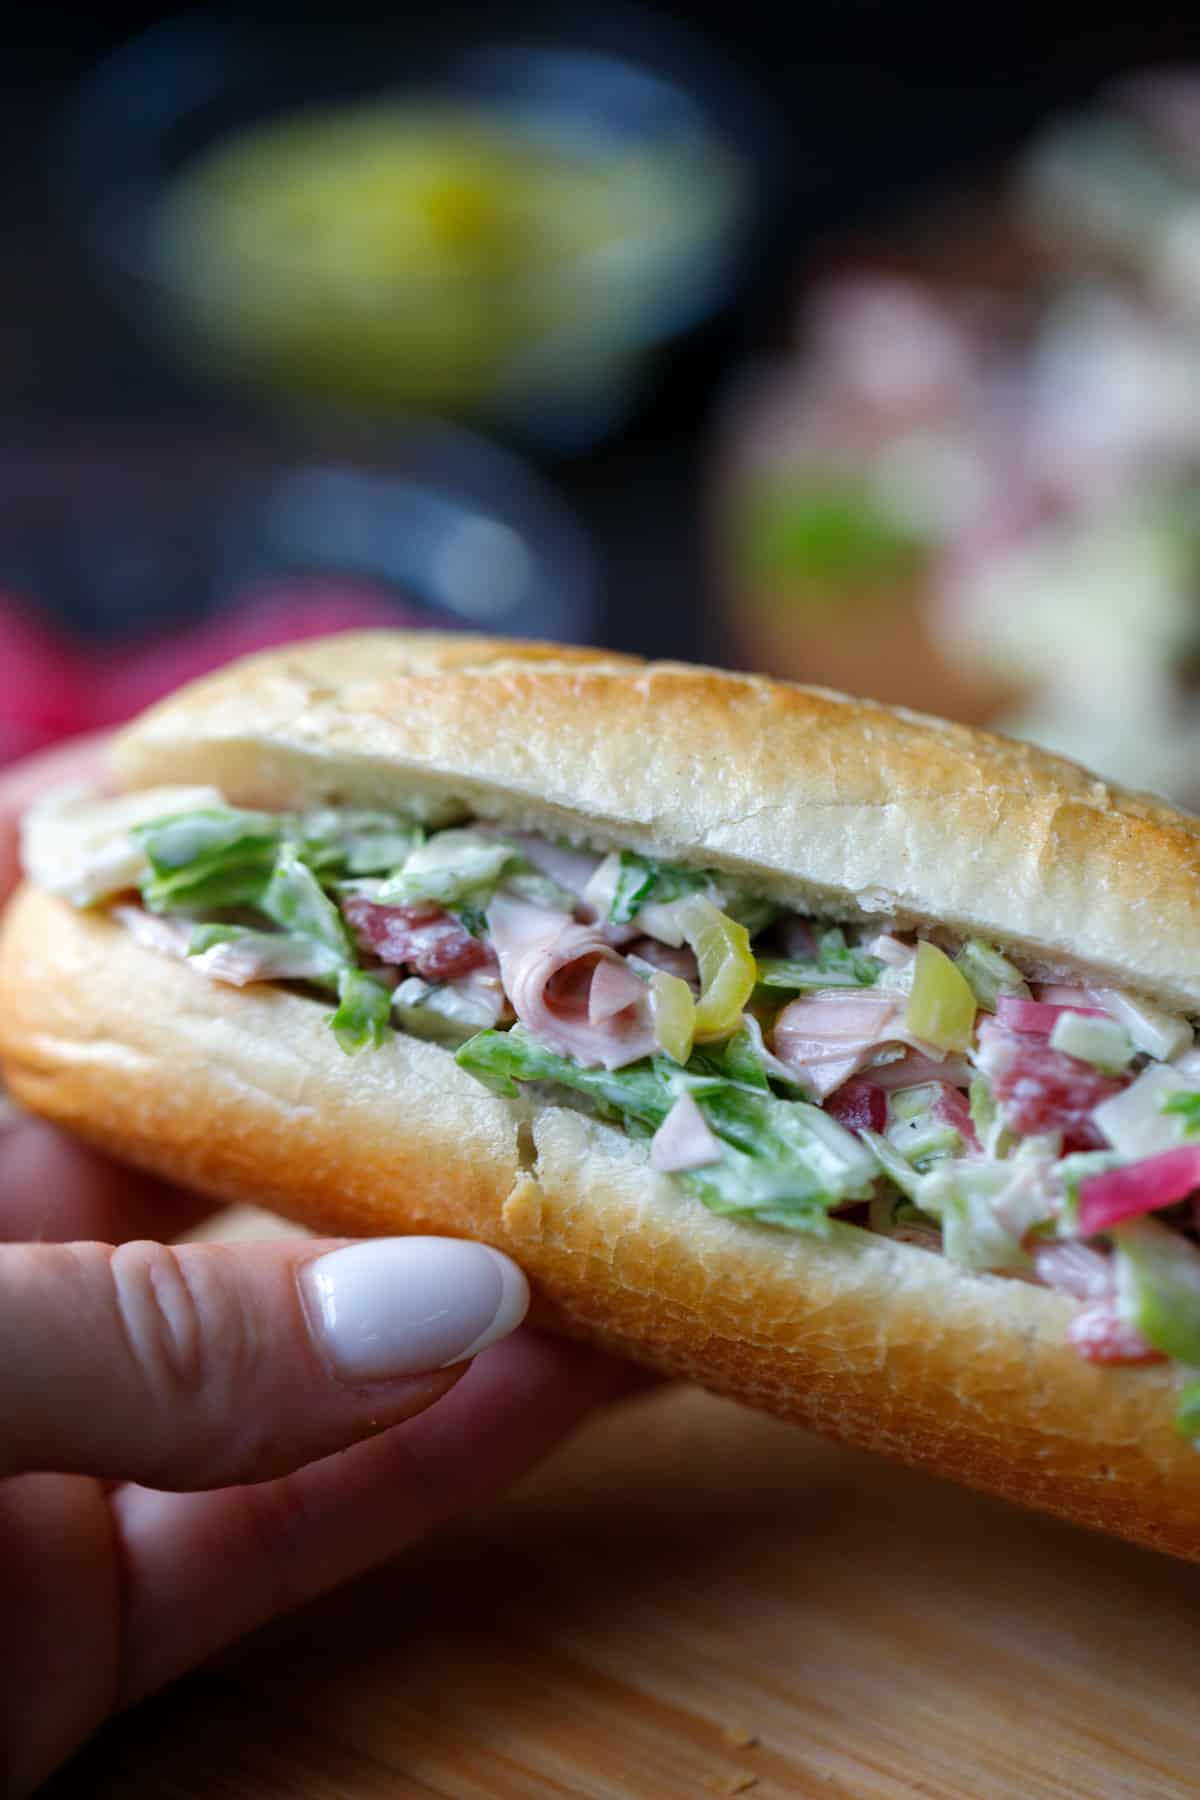 A hand holding a sub sandwich made with all chopped mortadella, salami, cheese, lettuce, tomatoes and mayo.